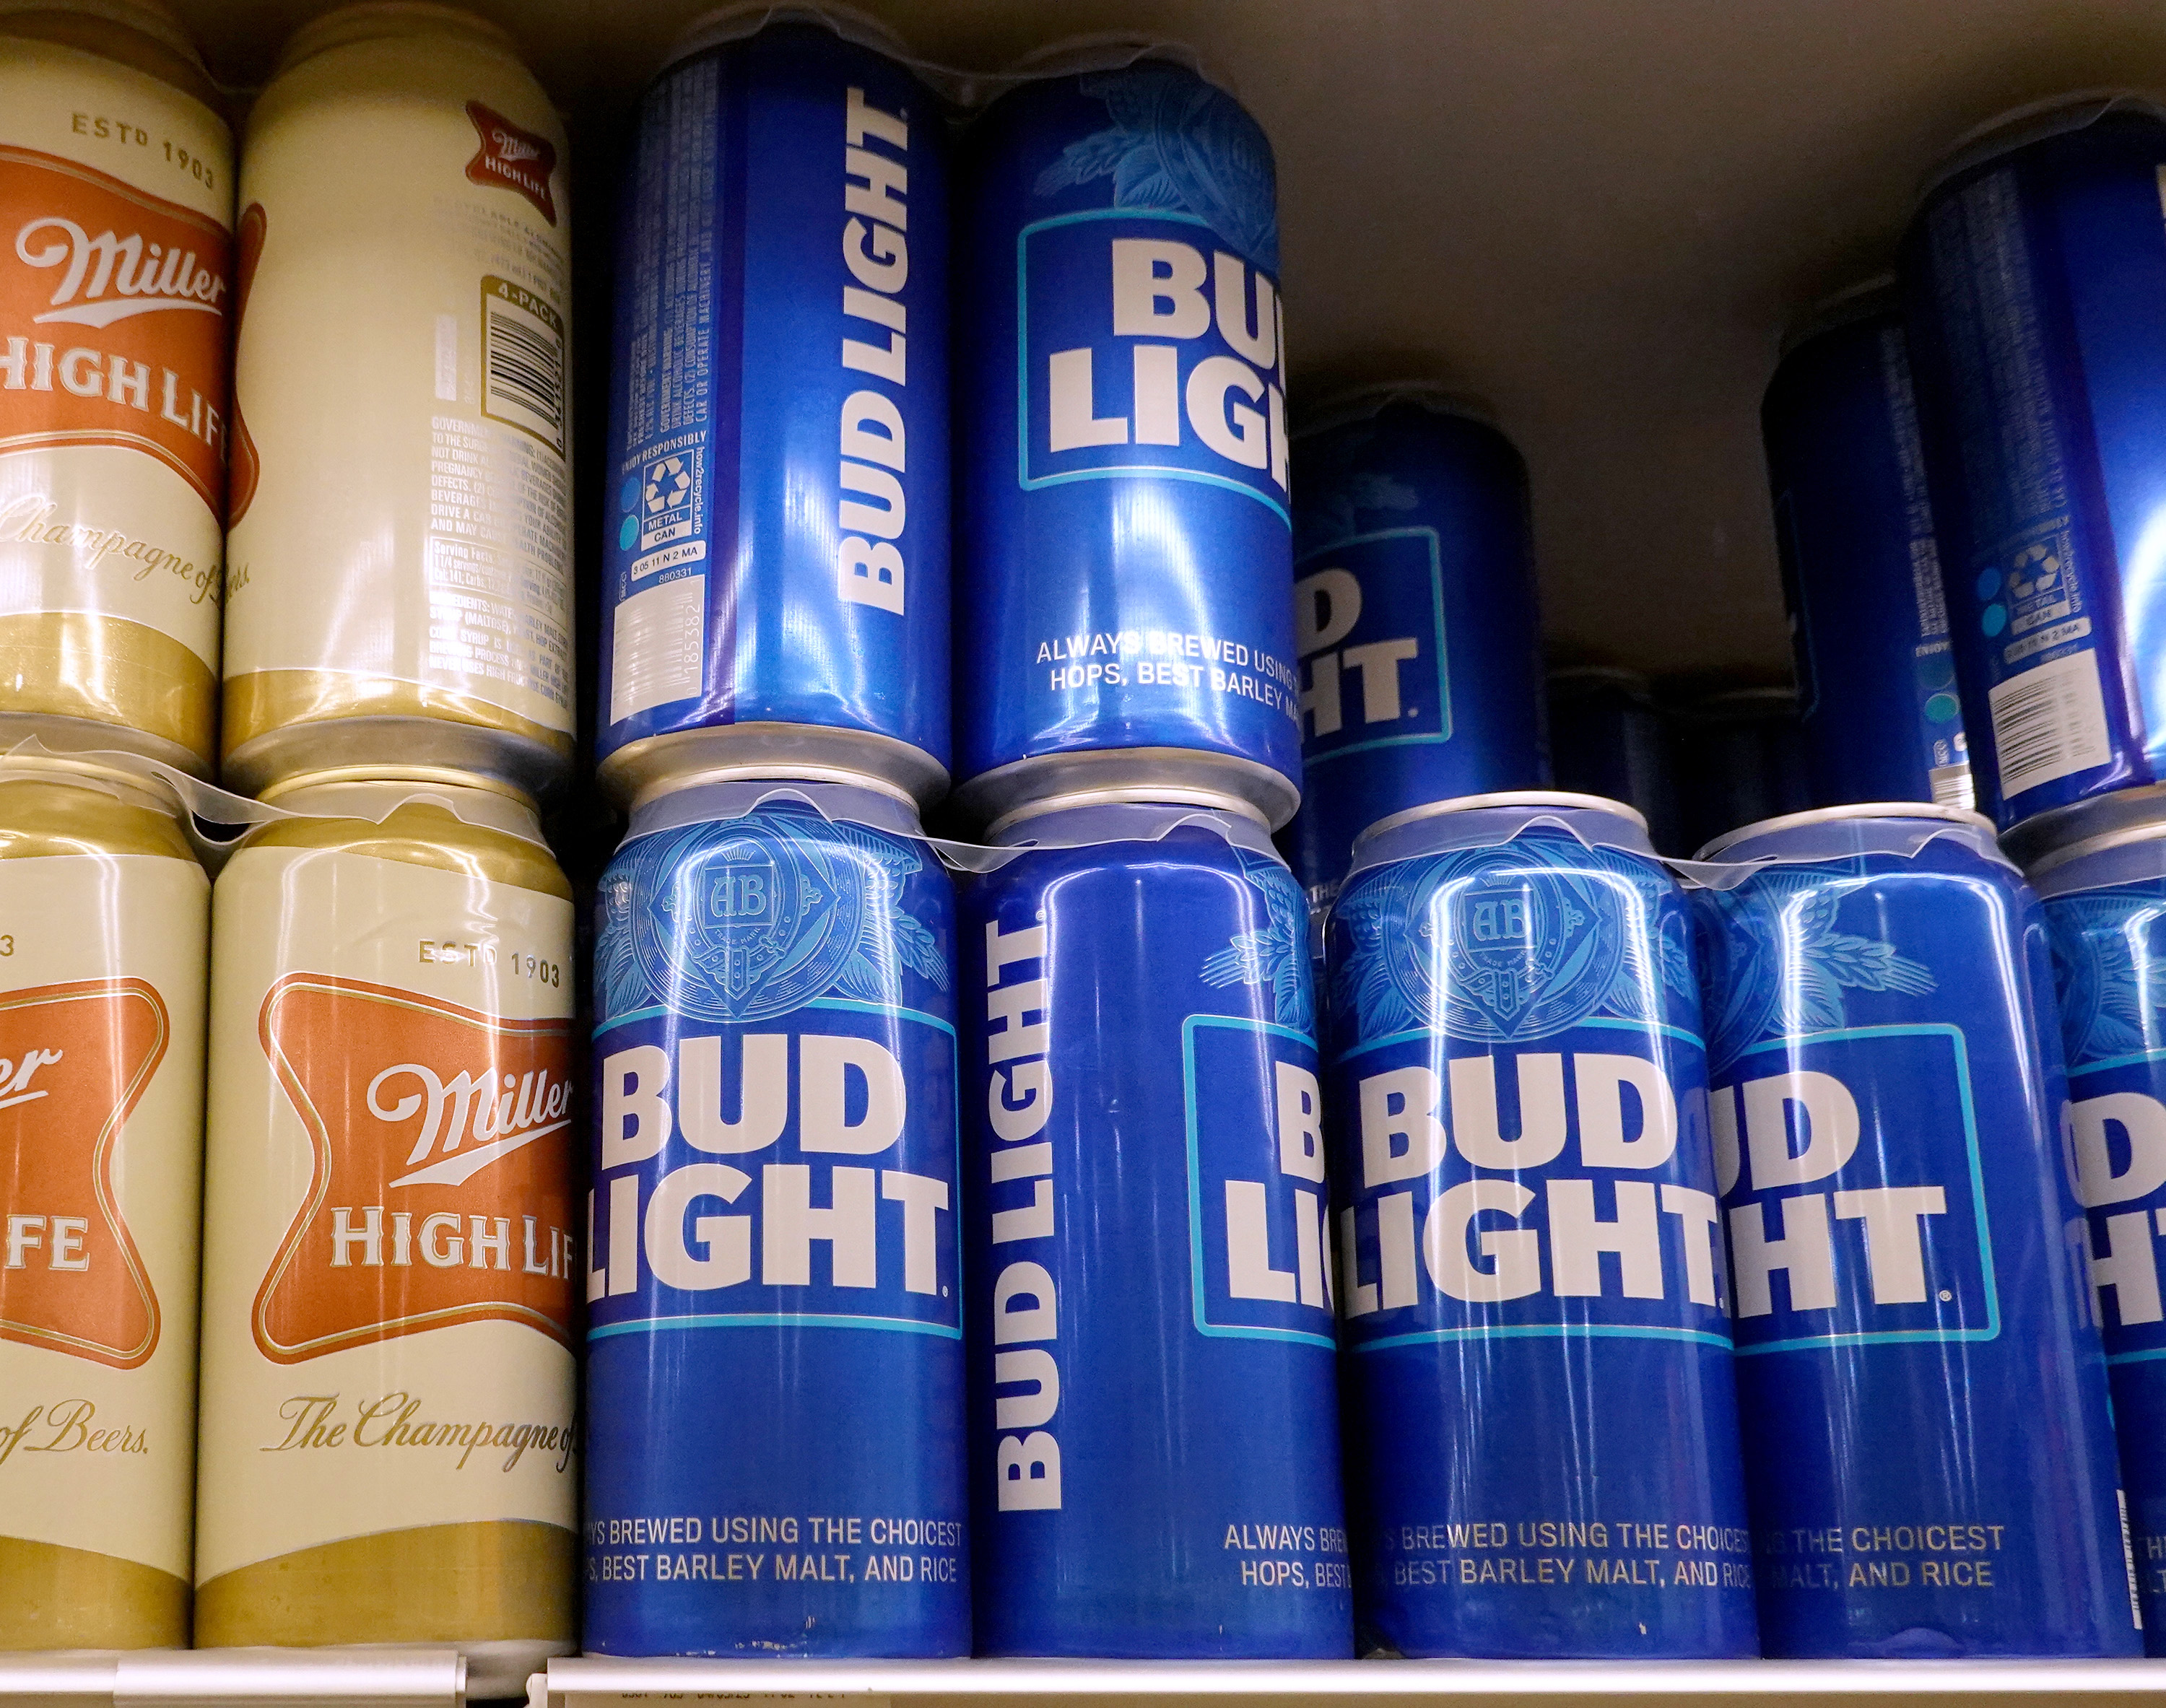 UFC's Dana White says Bud Light partnership was not 'determined by